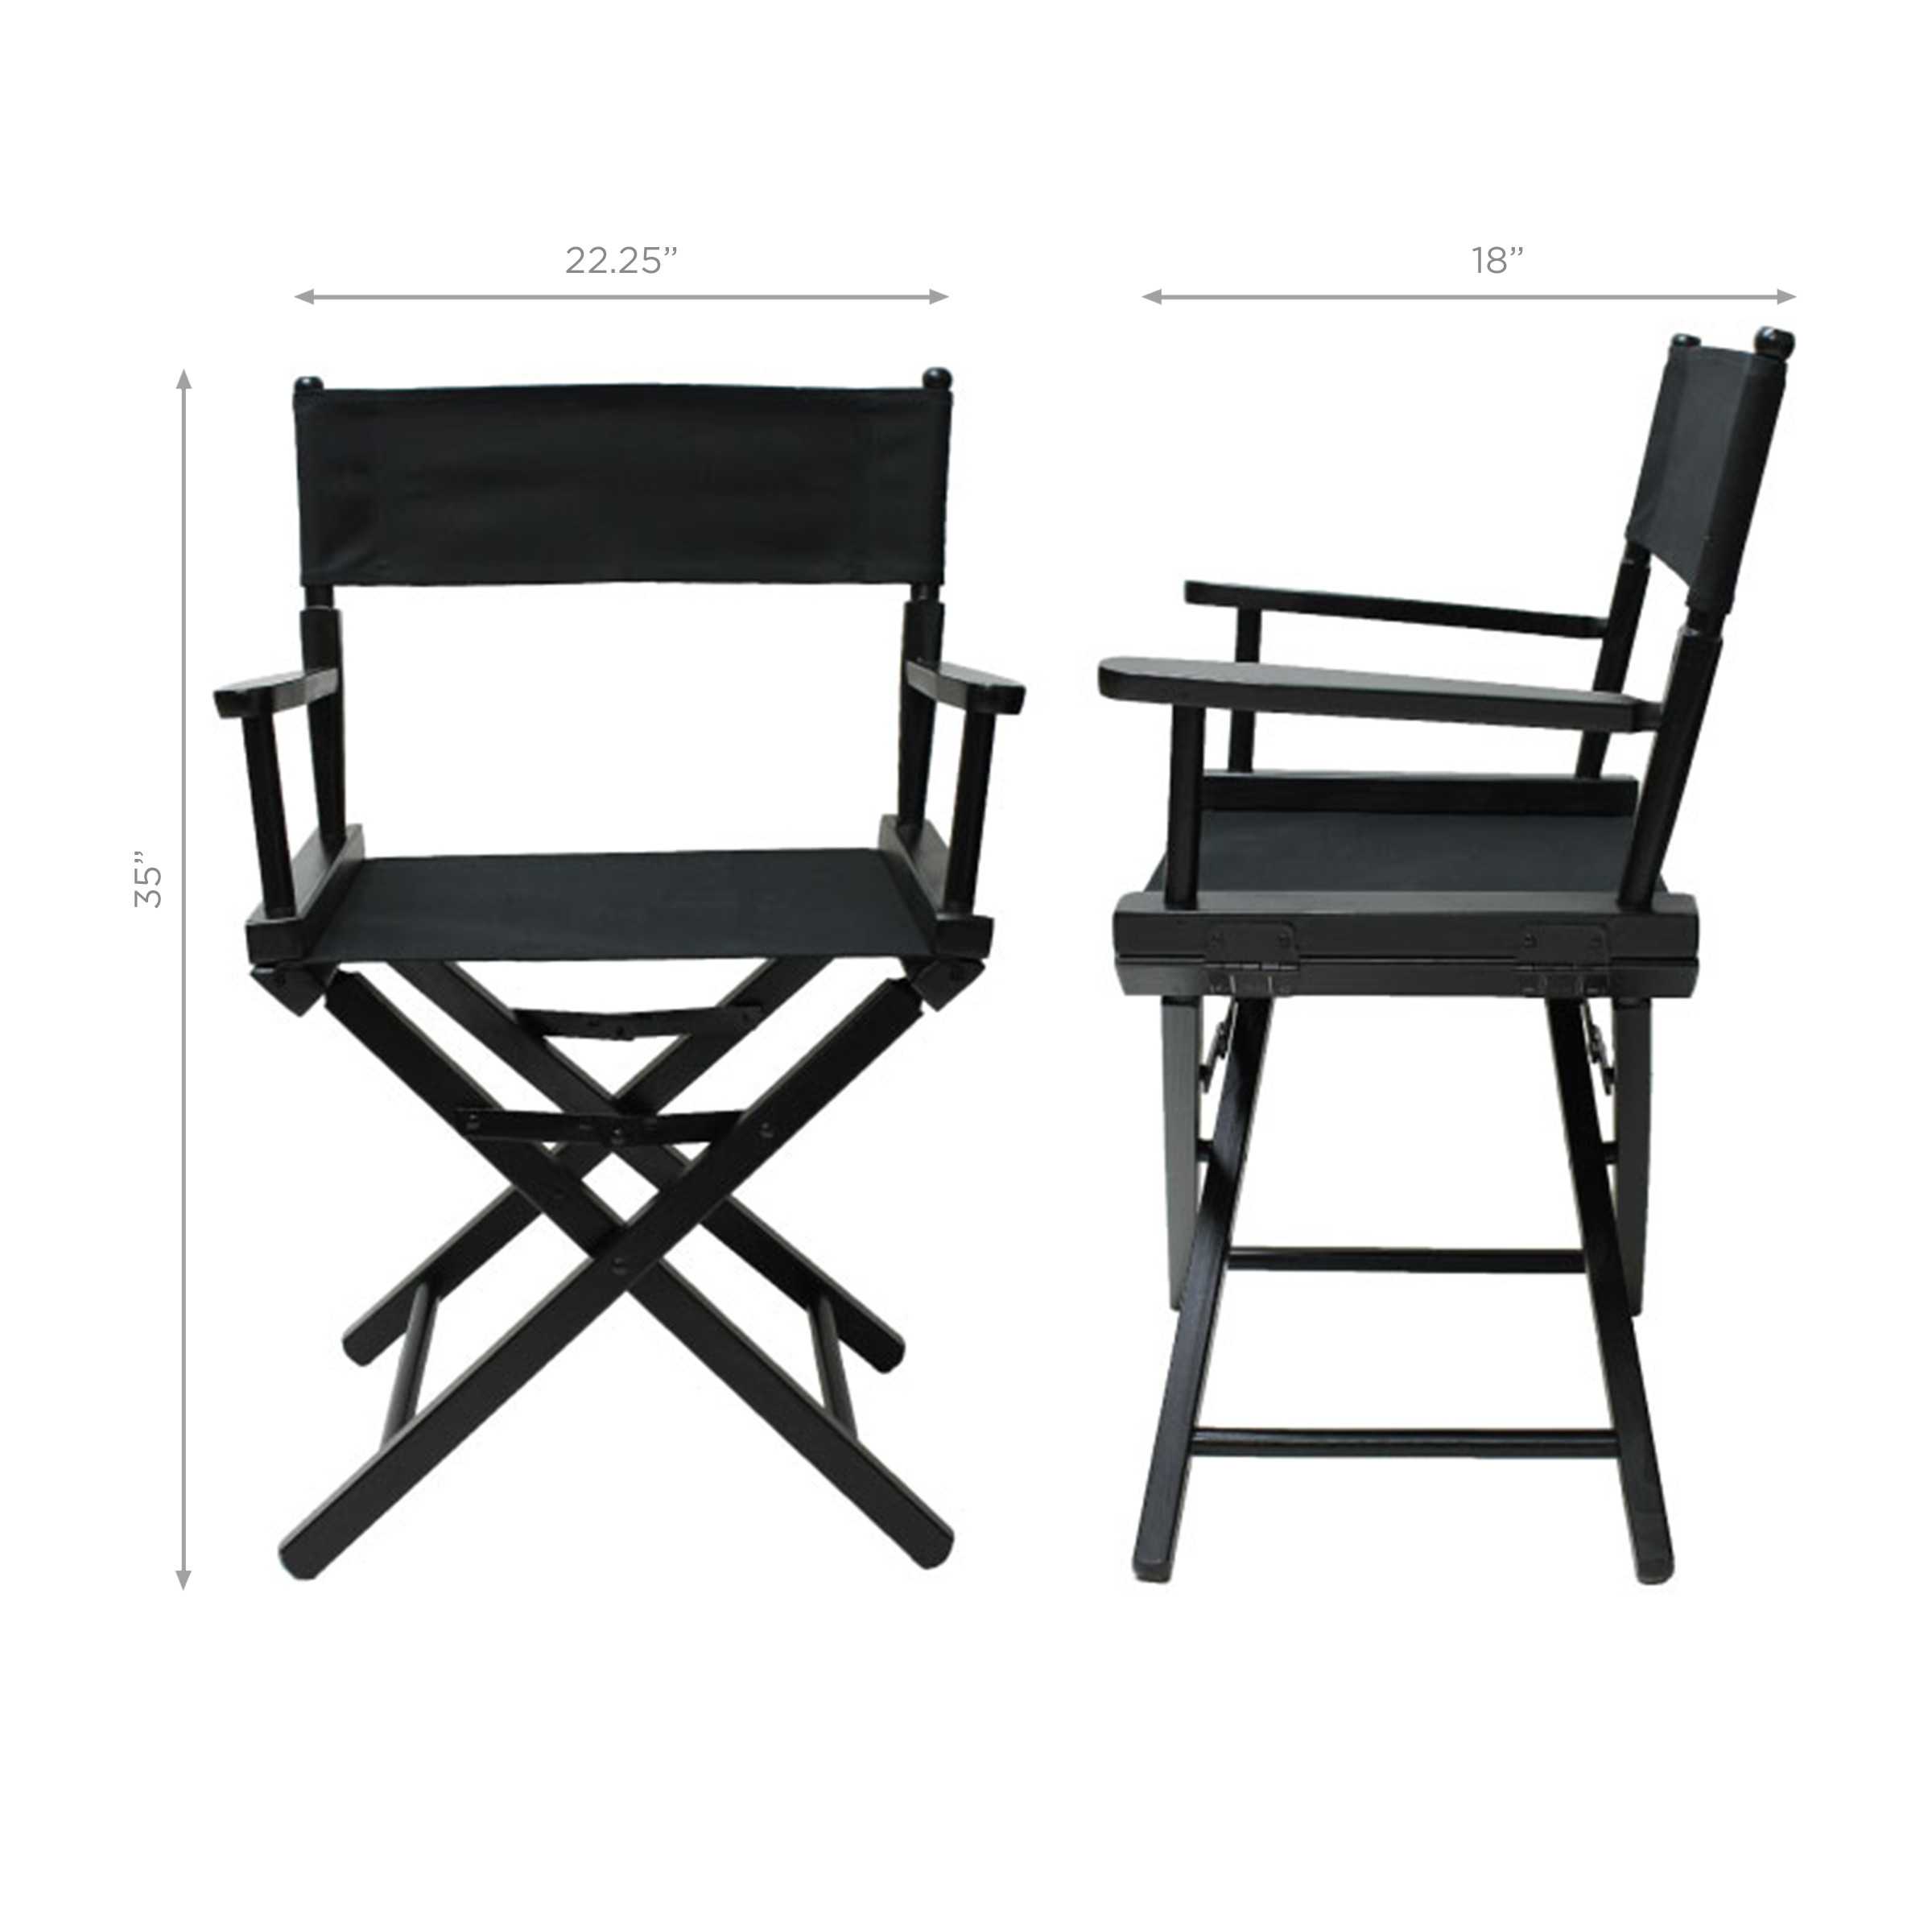 UNIVERSITY OF ALABAMA DIRECTORS CHAIR-TABLE HEIGHT